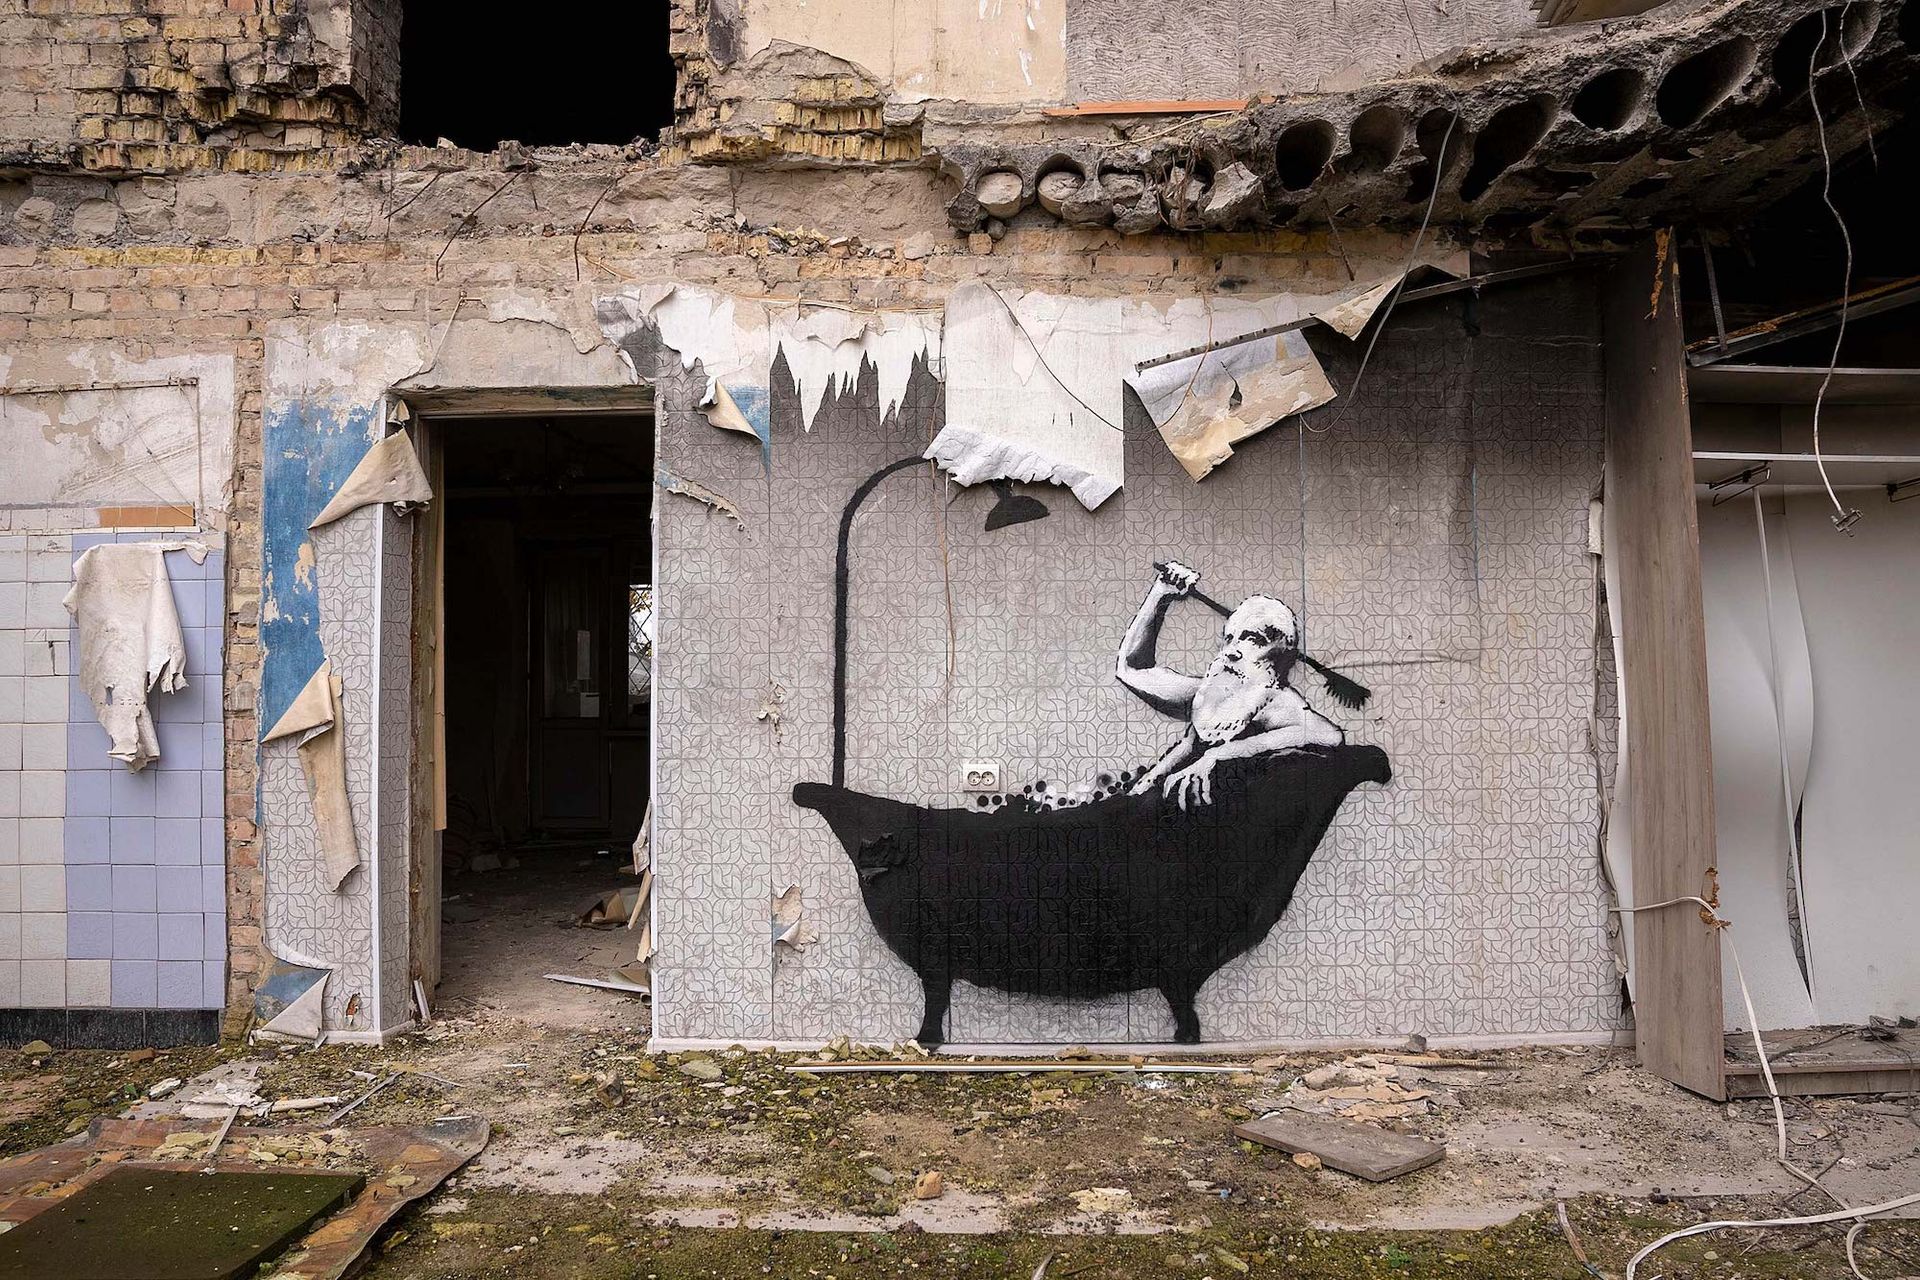 Banksy shares behindthescenes video of his Ukraine interventions